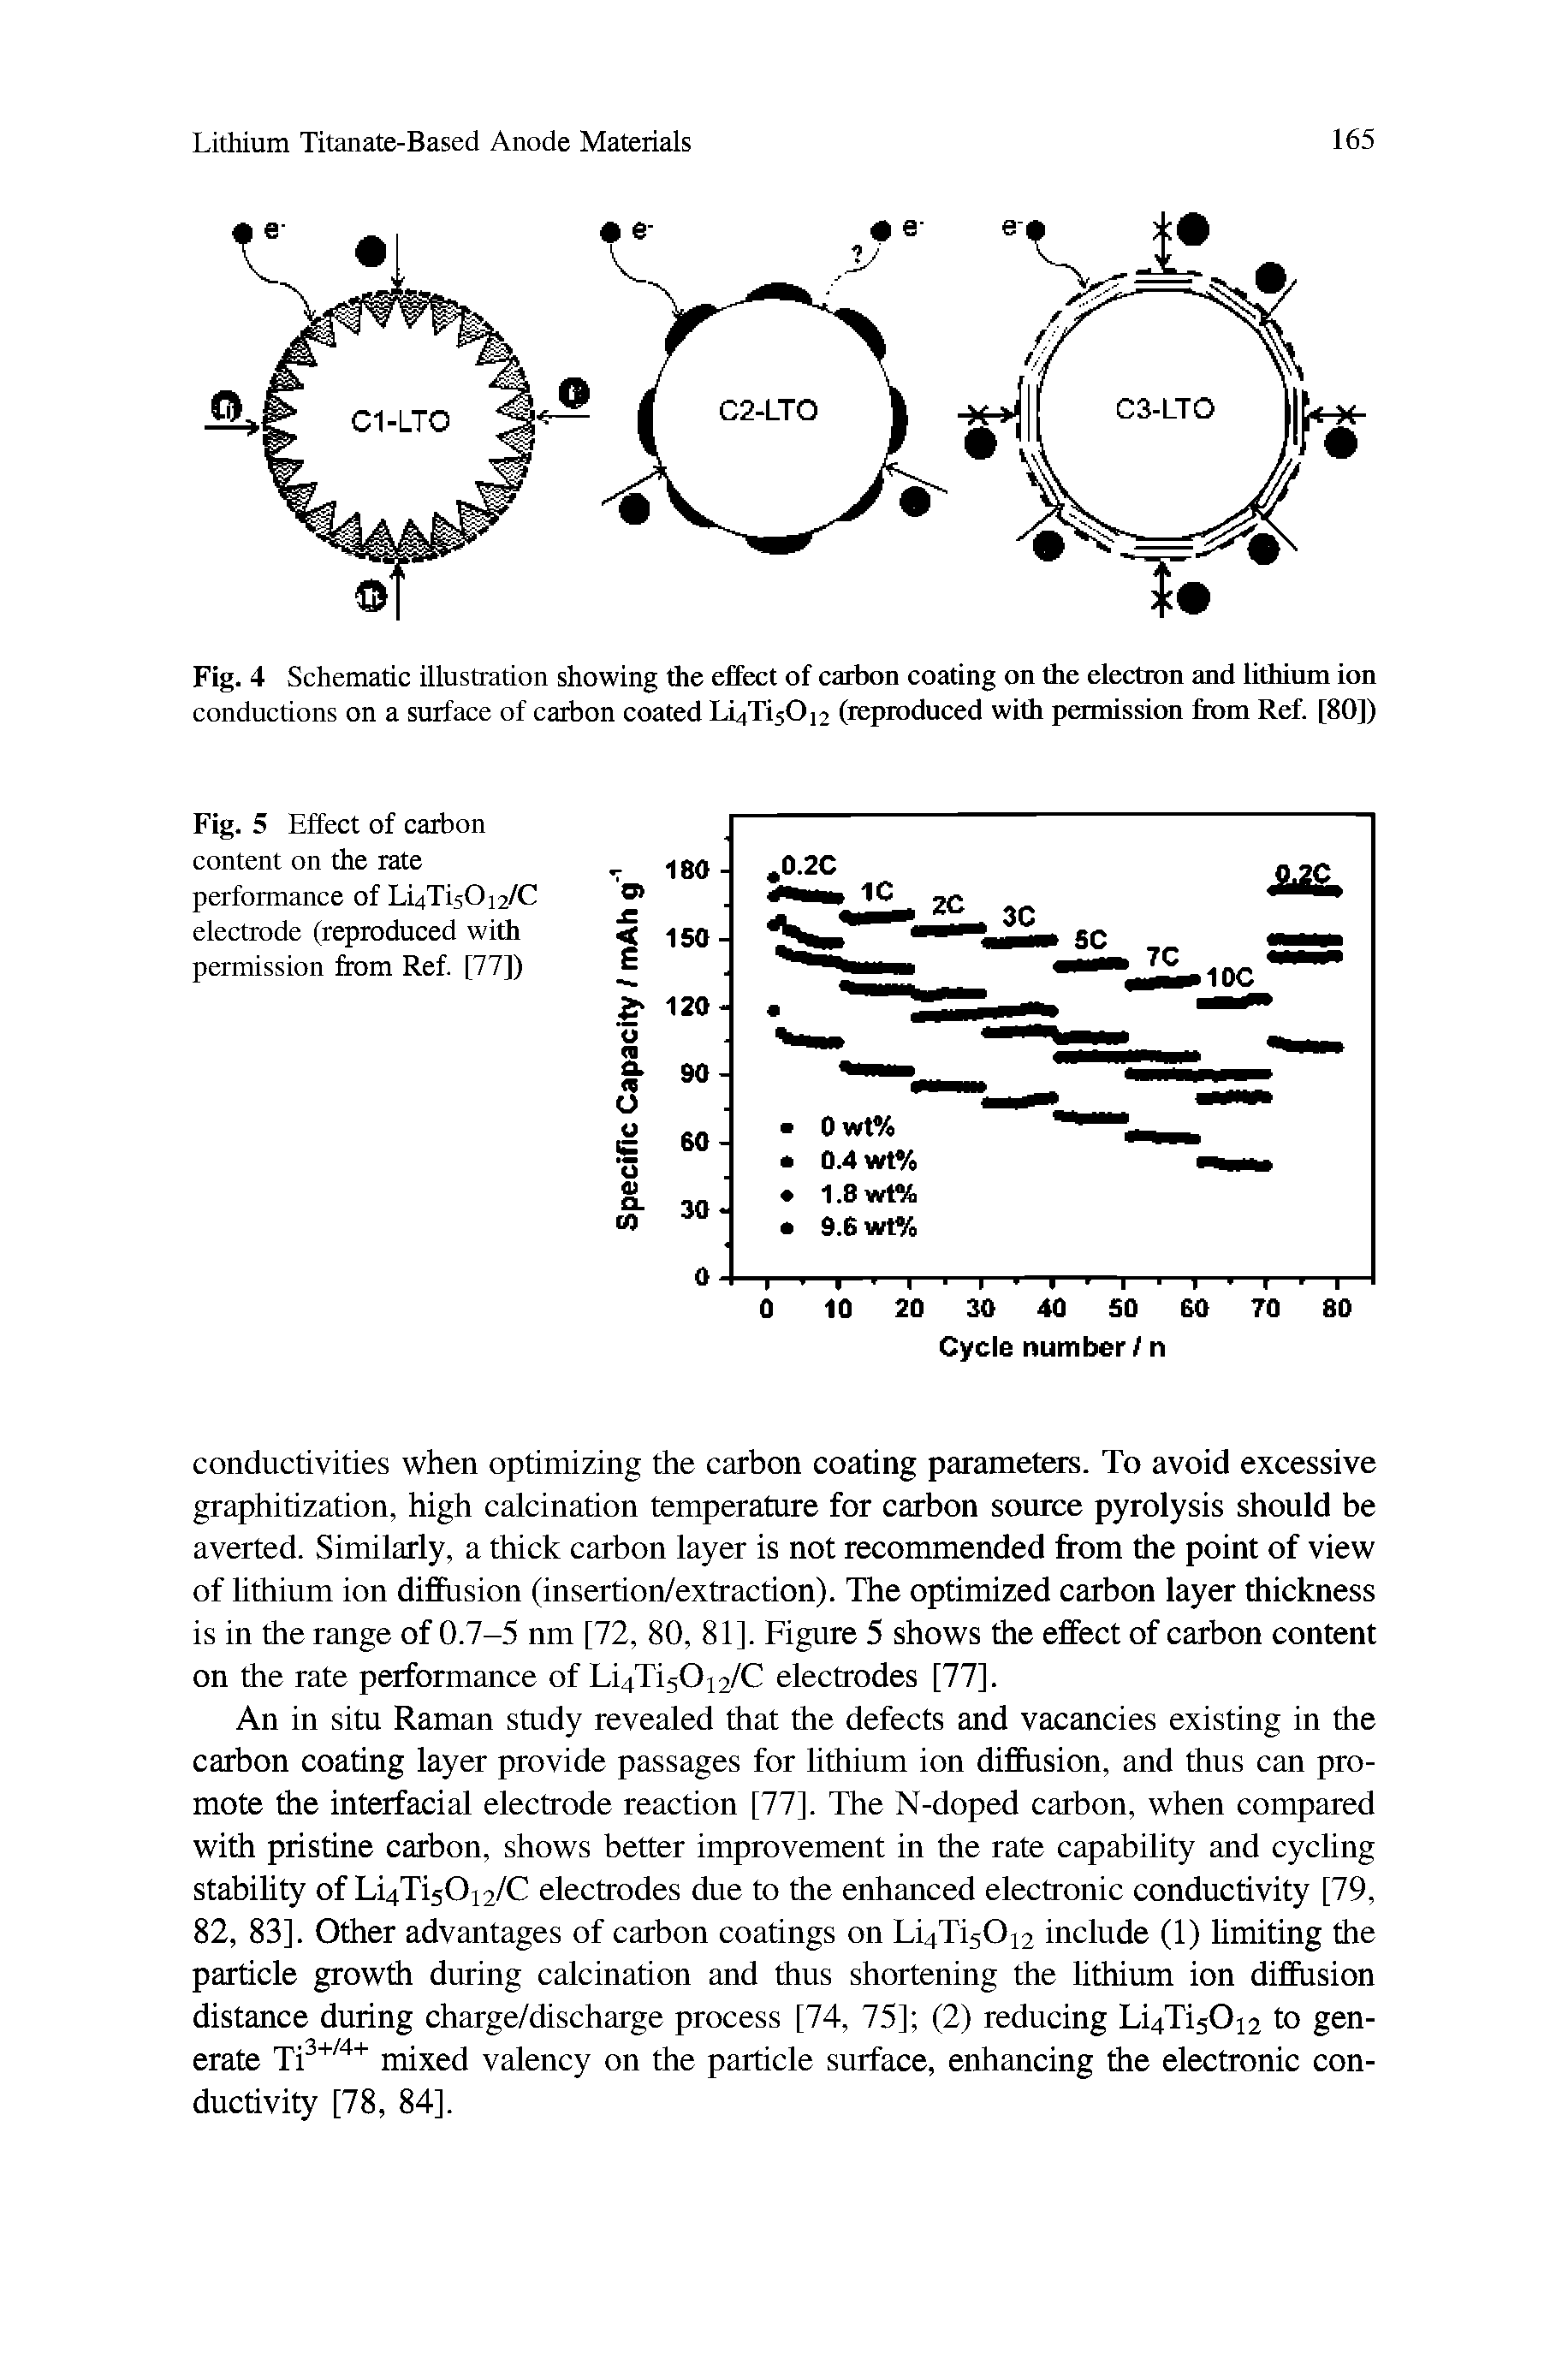 Fig. 4 Schematic illustration showing the effect of carbon coating on the election and lithium ion conductions on a surface of carbon coated Li4Ti50i2 (reproduced with pramission from Ref. [80])...